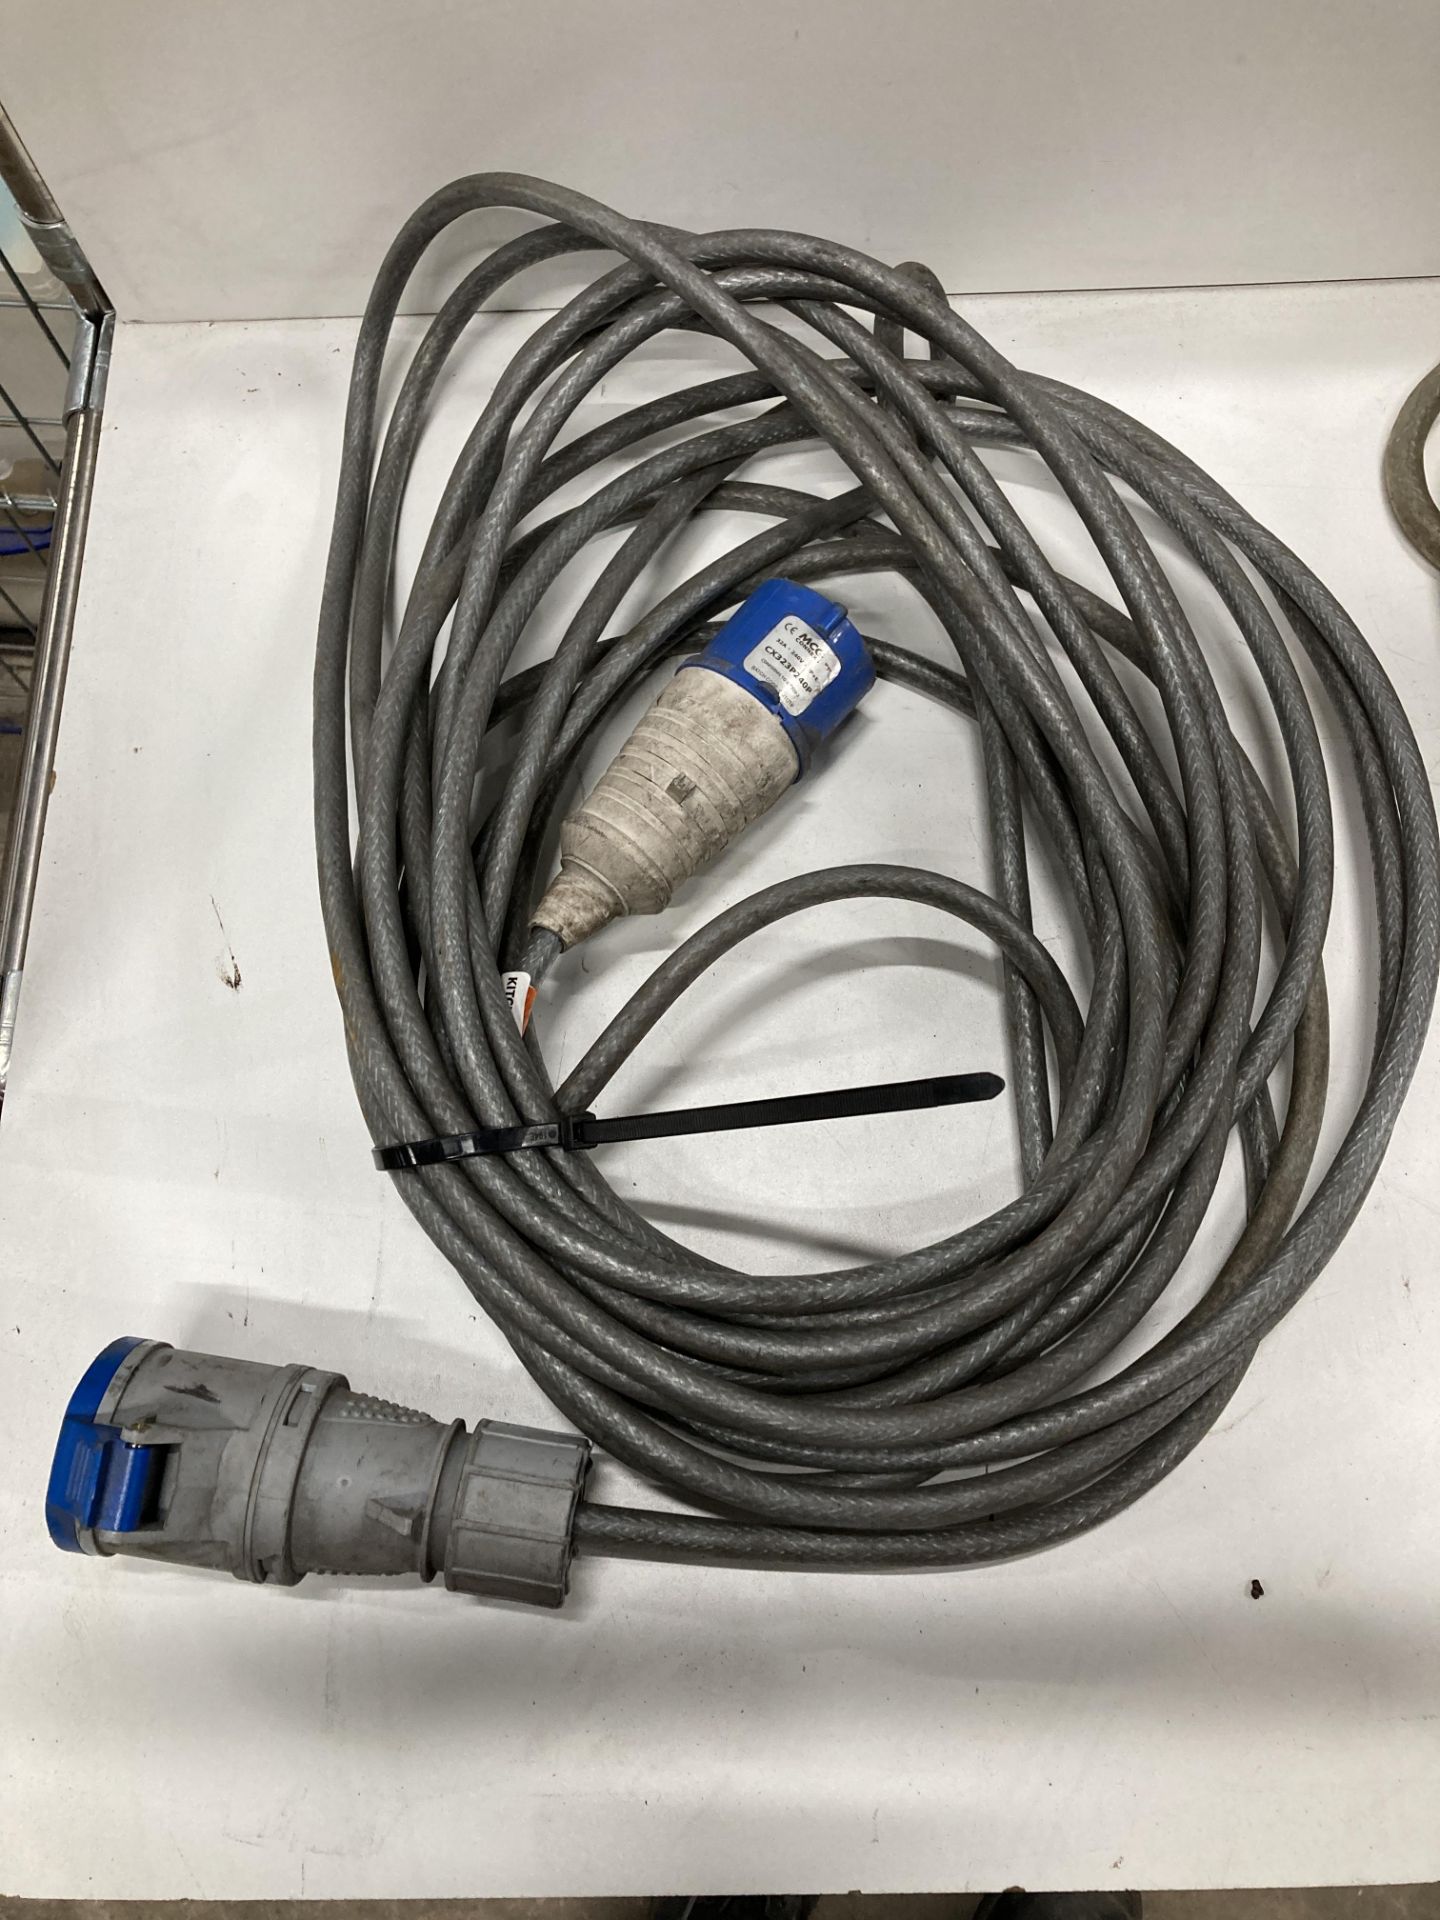 4 x Various 240v Extension/Adaptor Cables - As Pictured - Image 2 of 10